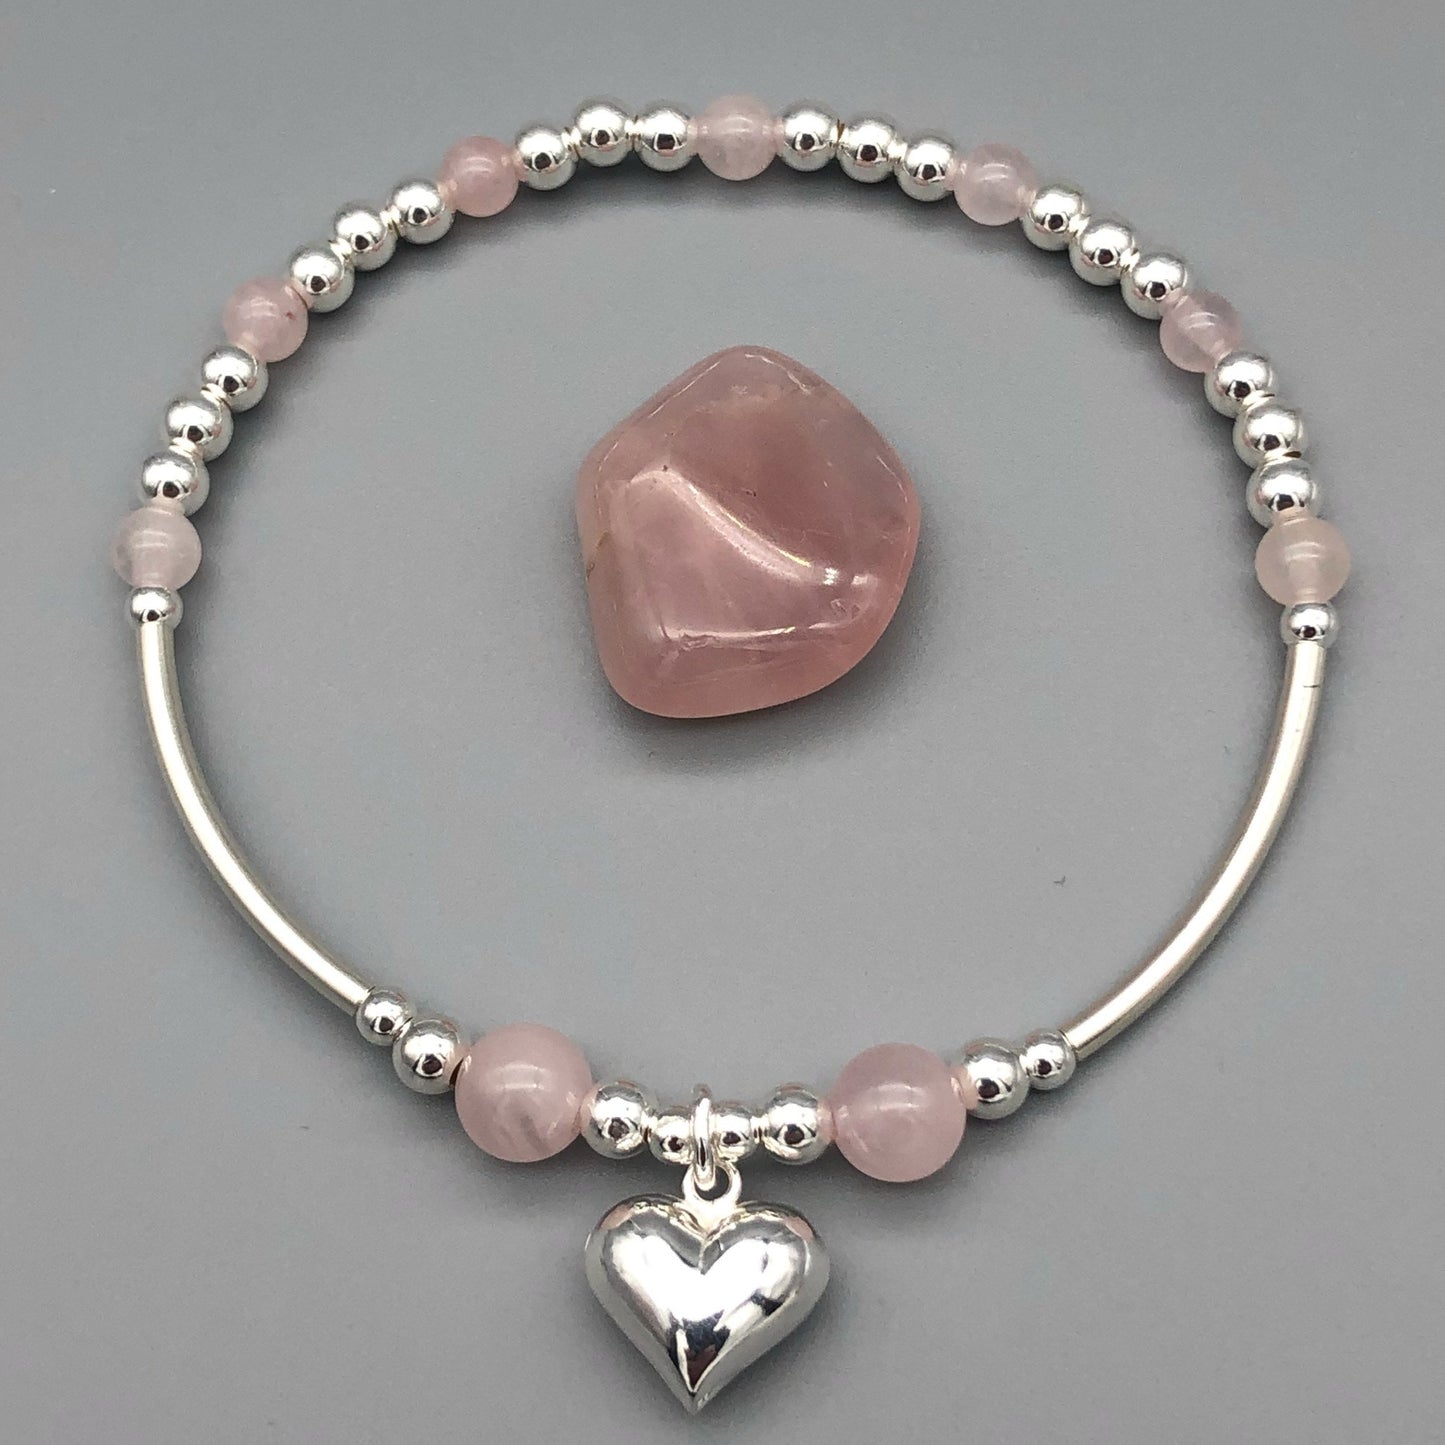 Puff heart charm sterling silver and Rose Quartz hand-made women's stacking bracelet and earring gift set